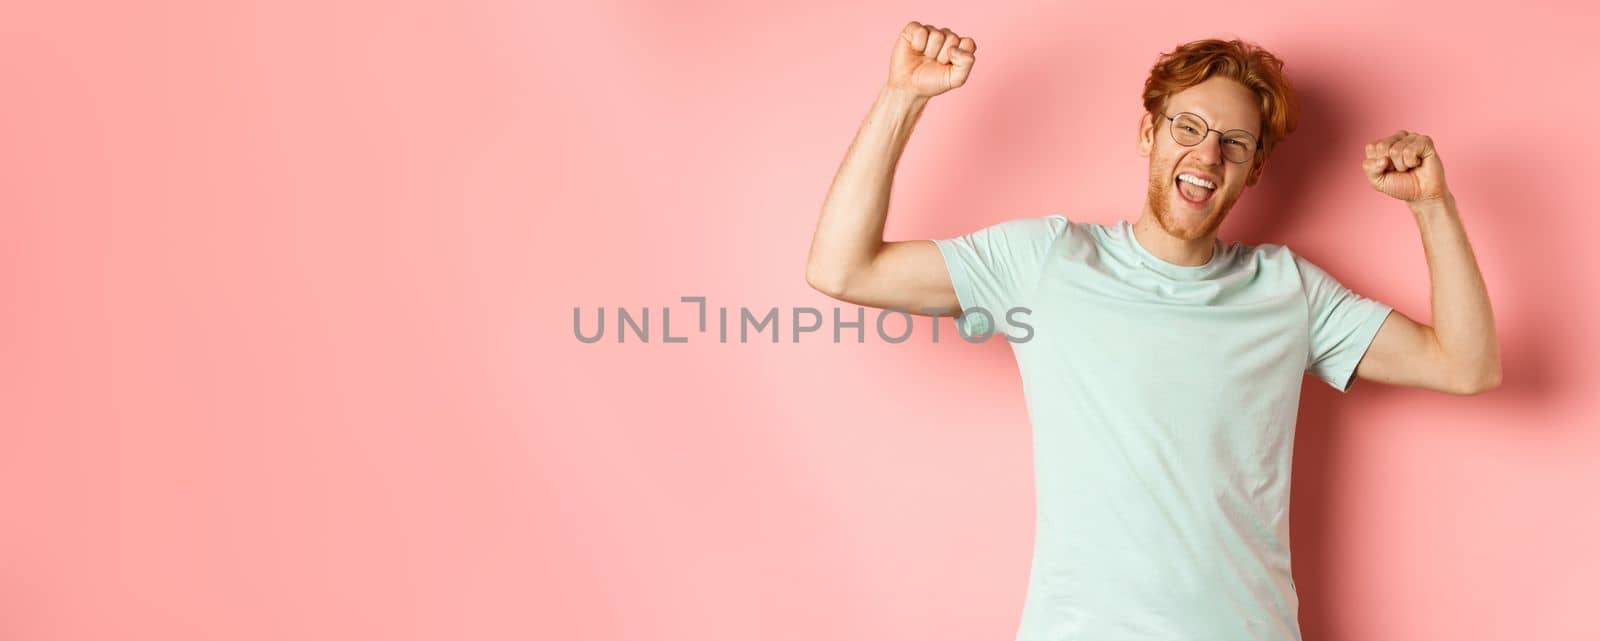 Cheerful young man with red hair looking happy, raising hands up in fist pumps gesture, celebrating success, feel like champion, winning and standing over pink background.